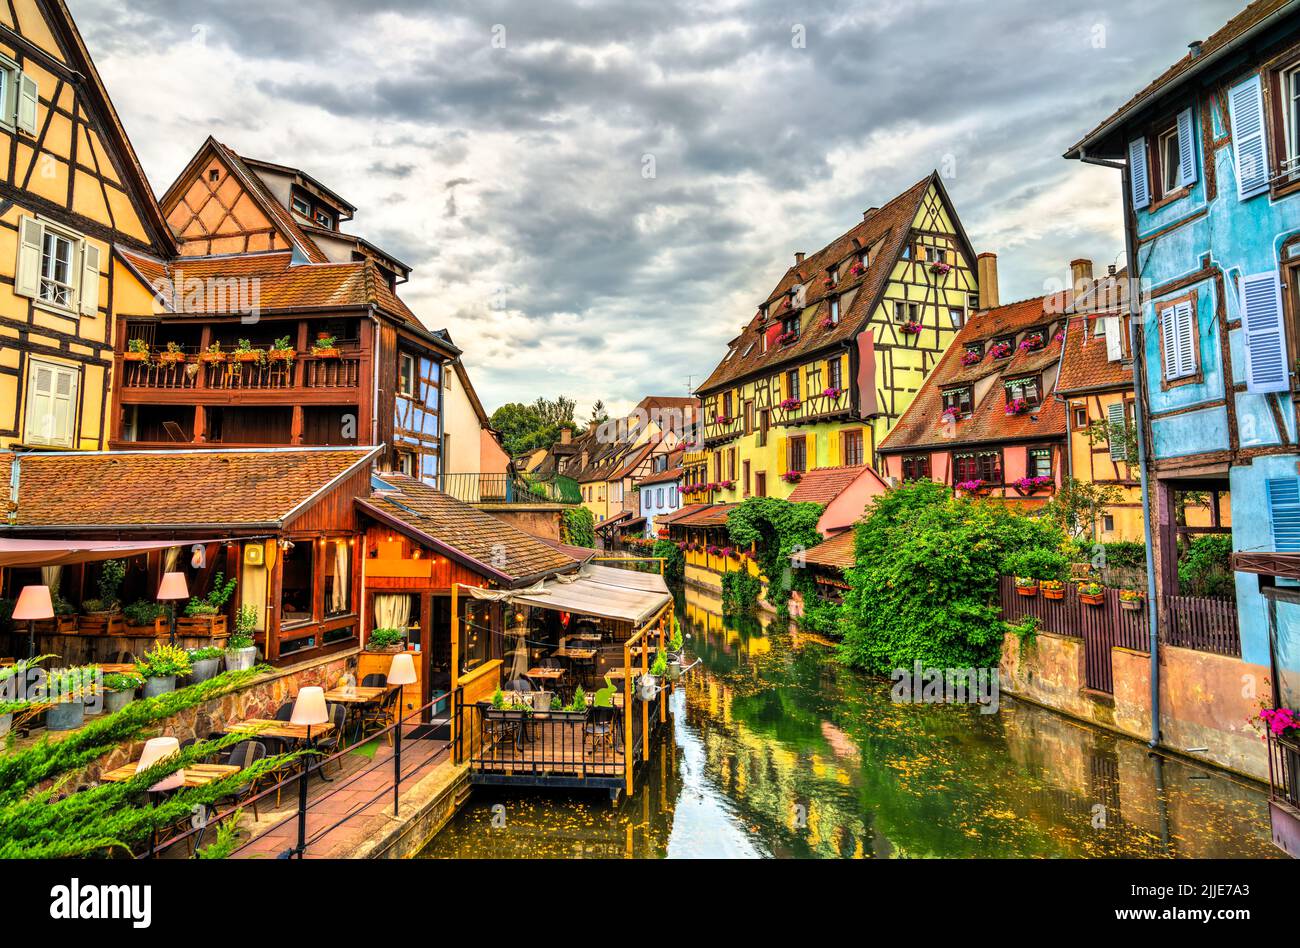 Traditional half-timbered houses in Colmar, France Stock Photo